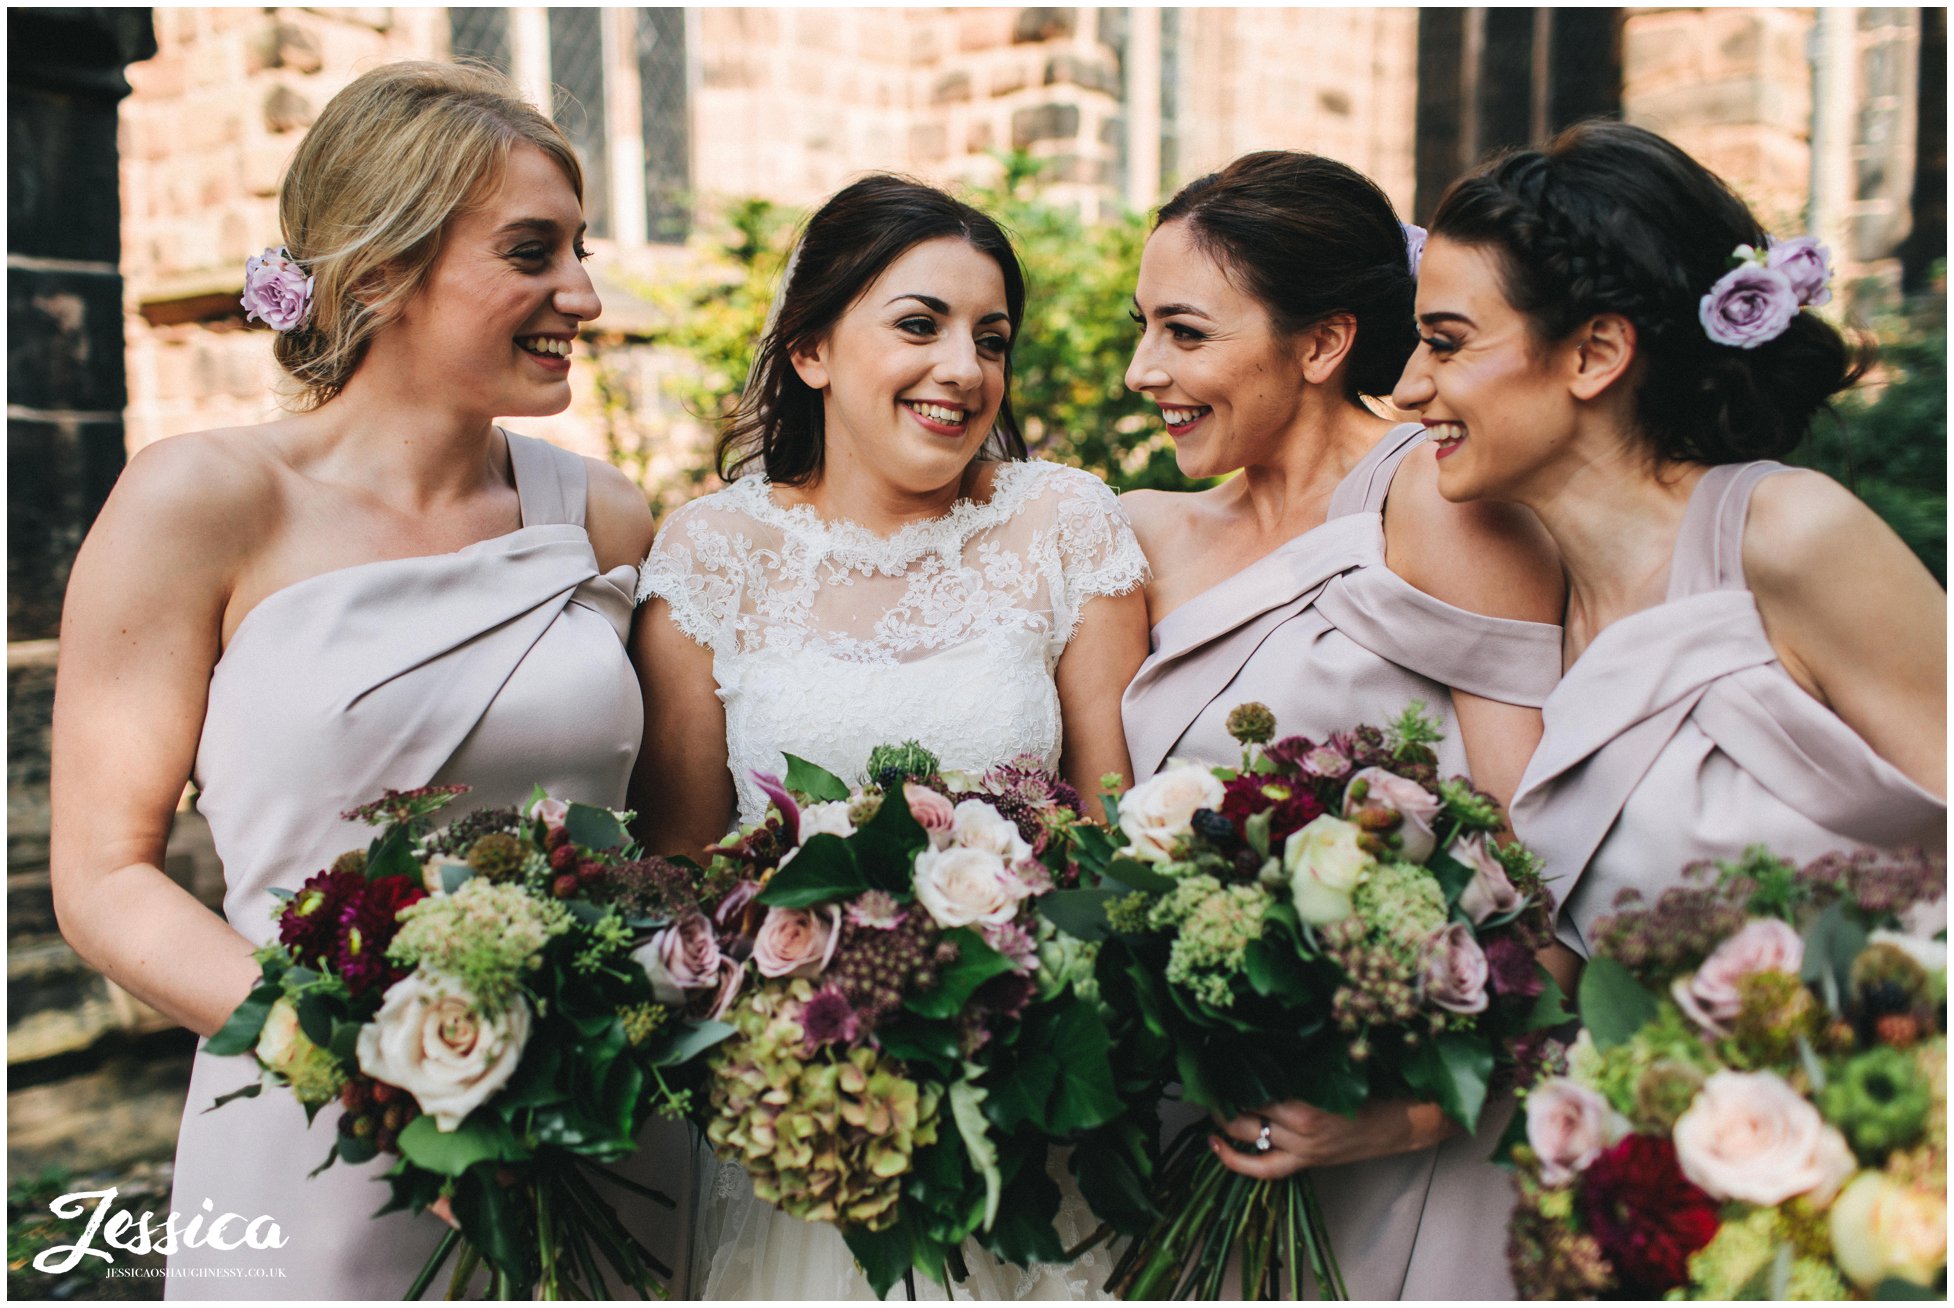 bride and bridesmaids laugh together before the ceremony